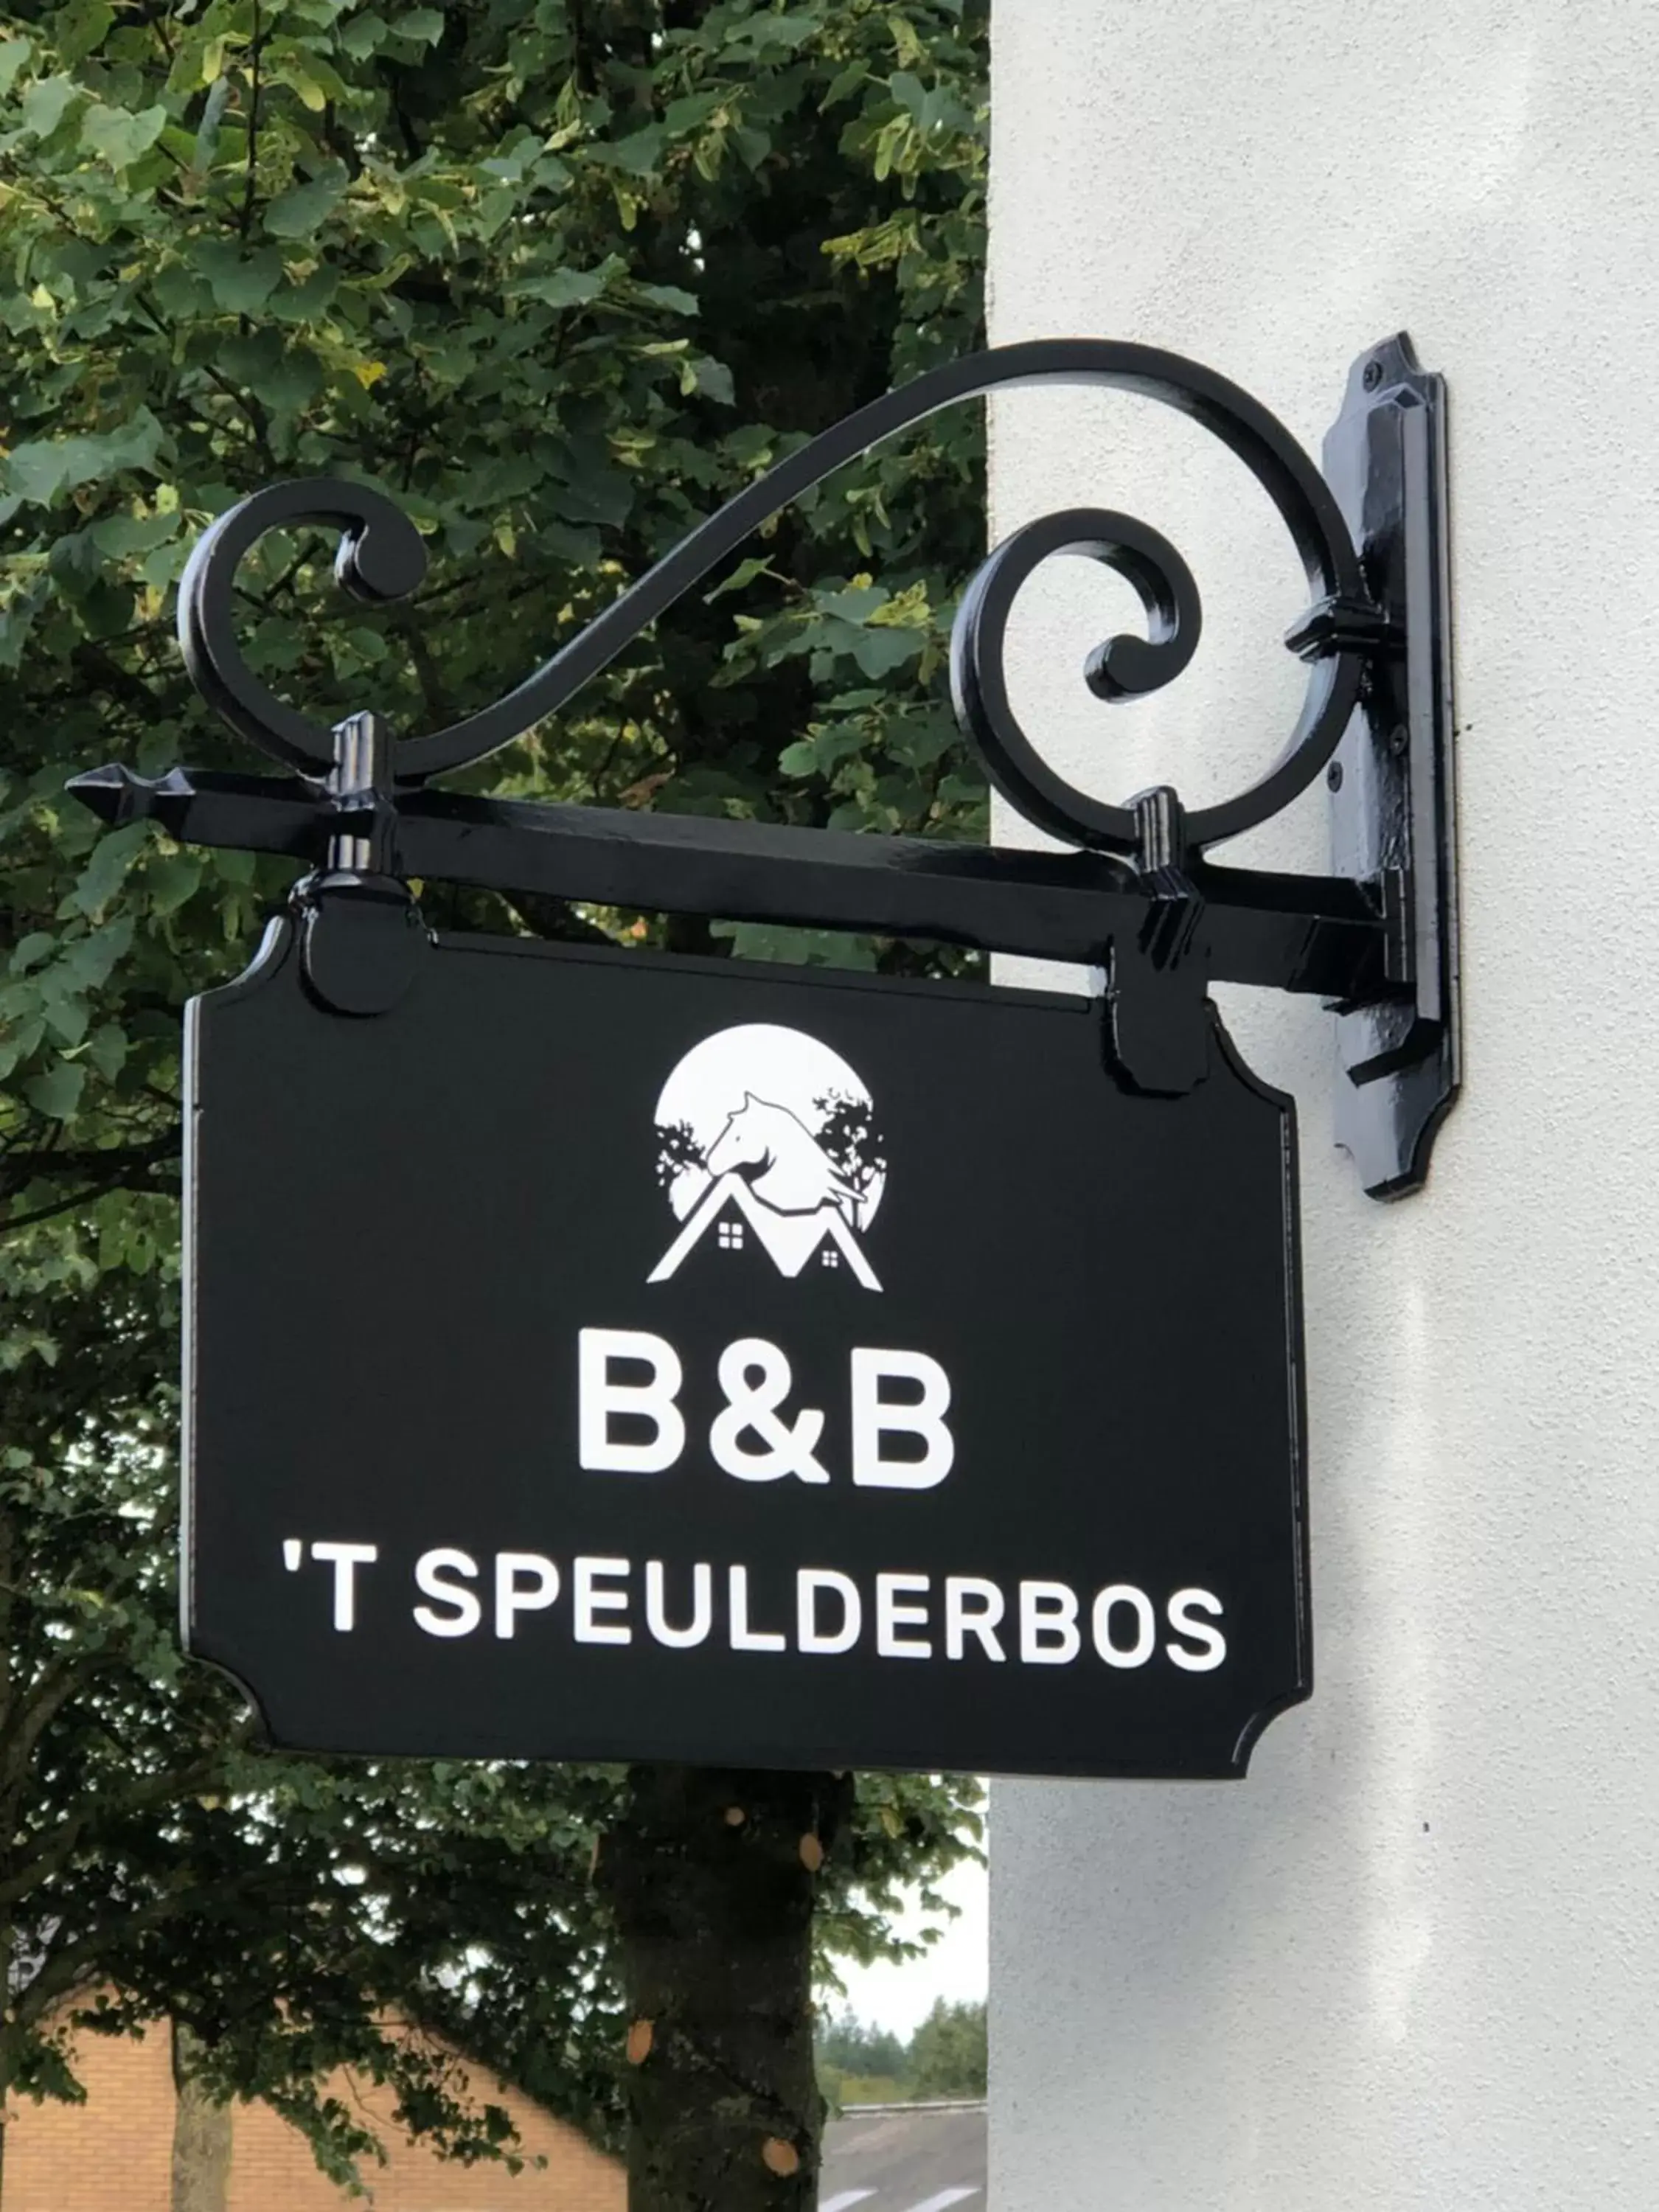 Property logo or sign, Property Logo/Sign in B&B 't Speulderbos